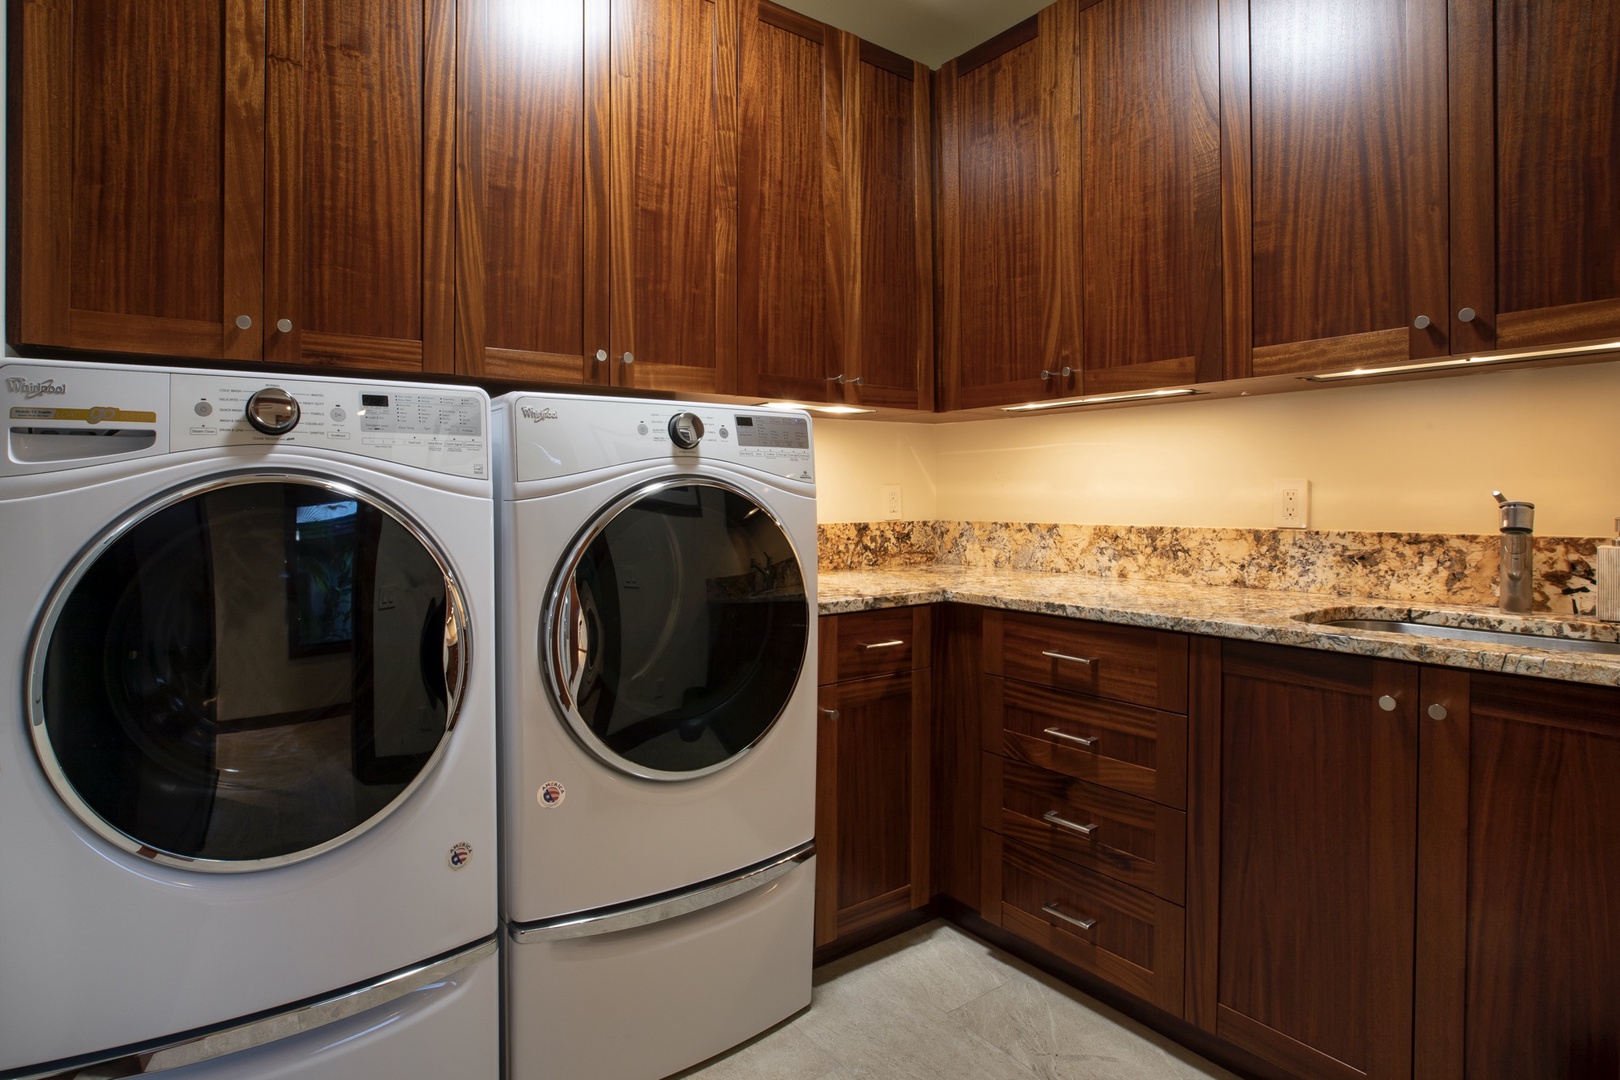 Kailua Kona Vacation Rentals, 4BD Kulanakauhale (3558) Estate Home at Four Seasons Resort at Hualalai - Dedicated laundry room with oversized Whirlpool washer and dryer, sink and ample counter prep space.